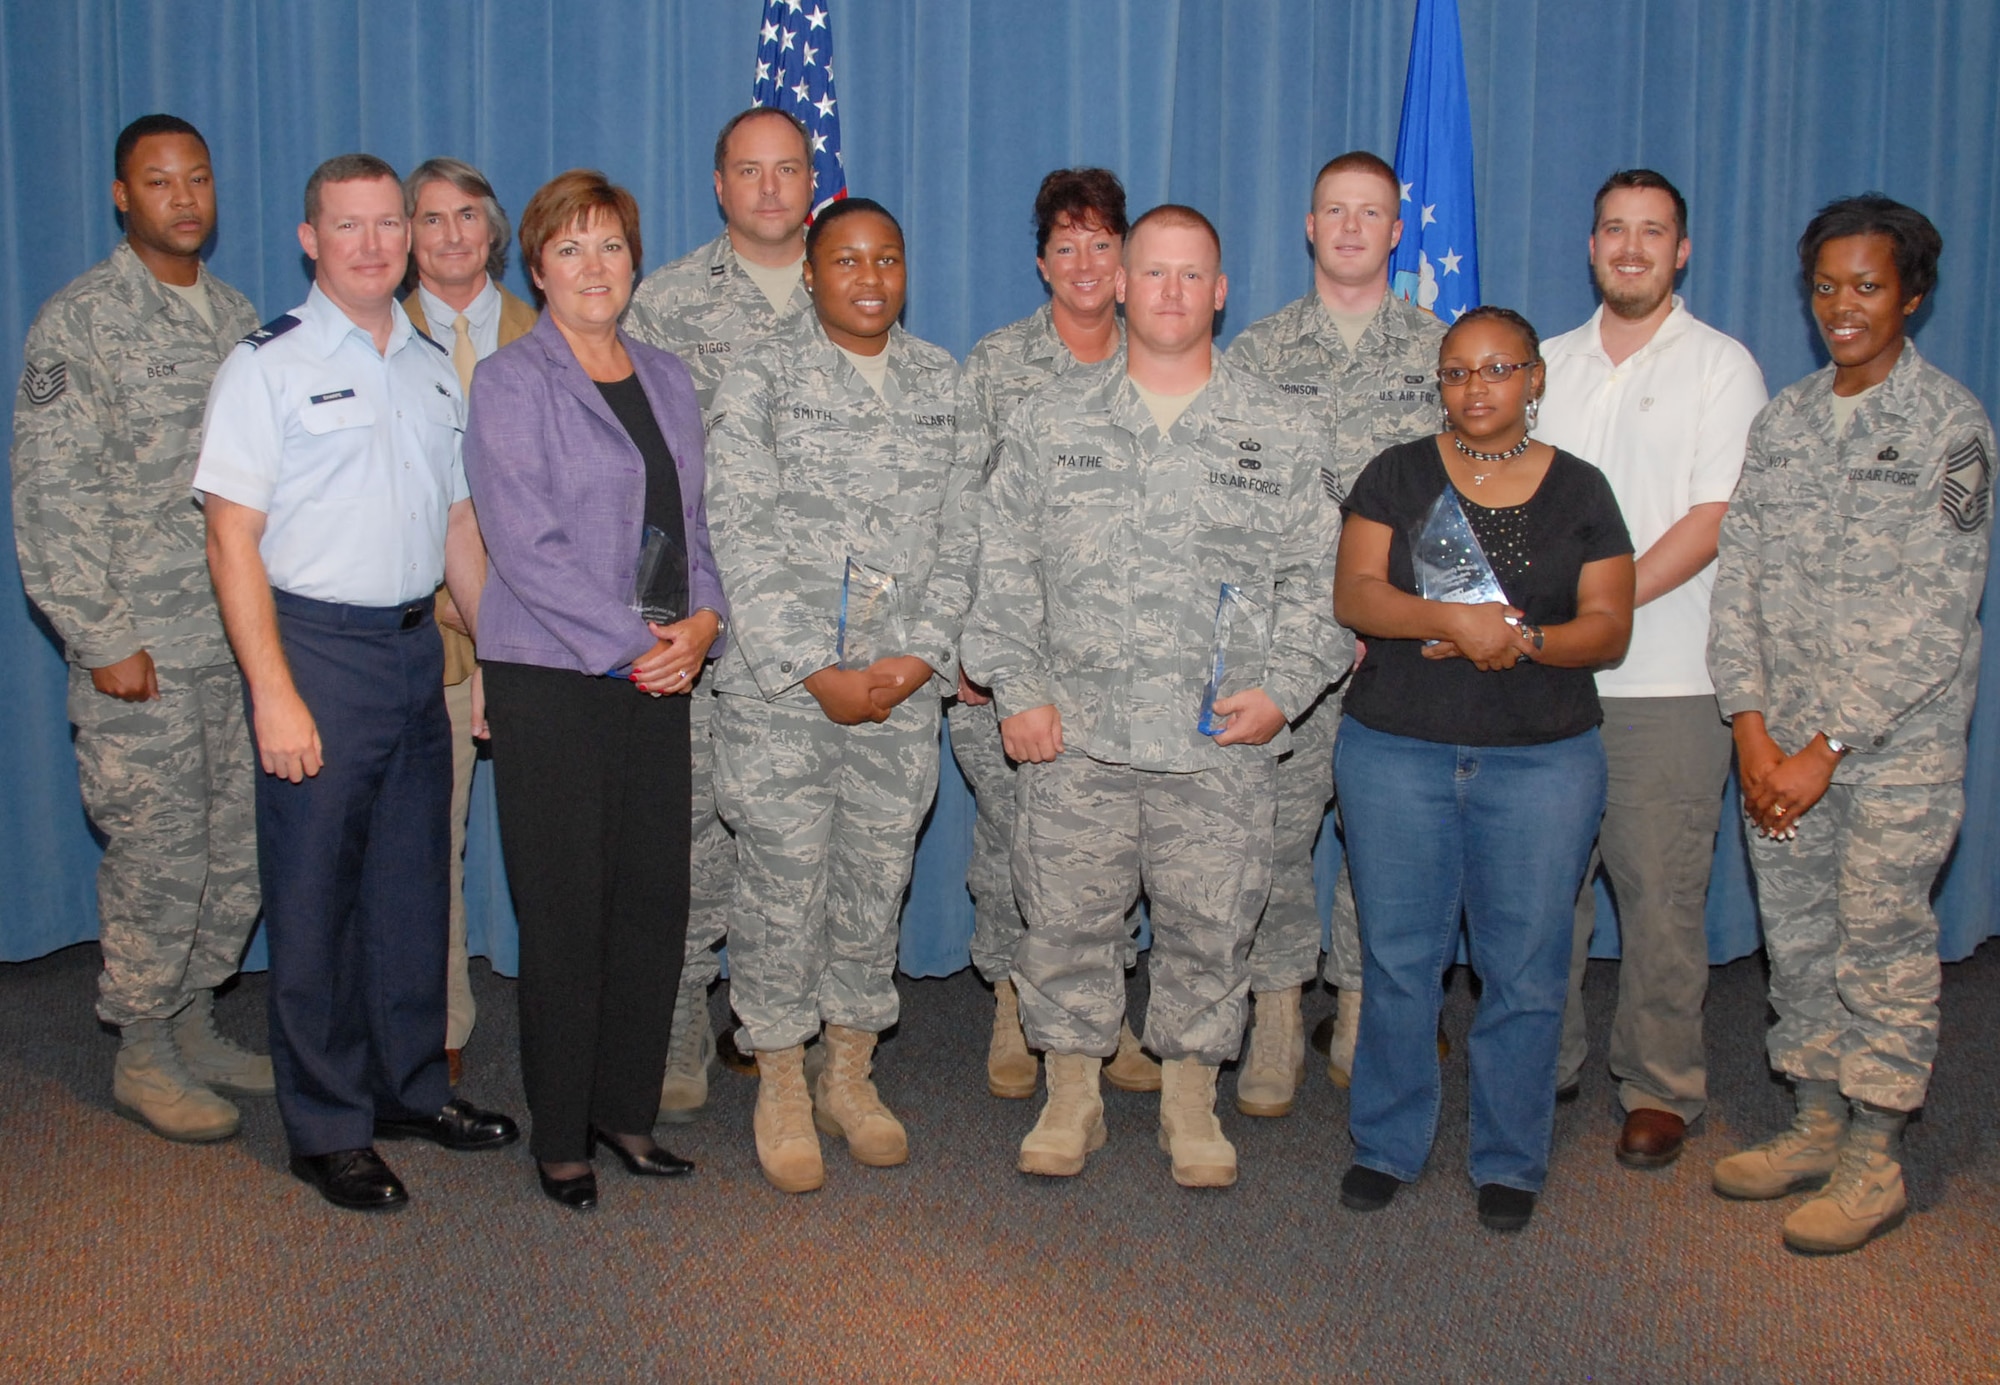 Back row from left: Tech. Sgt. Vincent Beck, Dr. John Ackerman, Capt. Michael Biggs, Senior Master Sgt. Rhonda Ball, Airman 1st Class Robert Robinson and Jeremy Abbott. Front row from left: 42nd Air Base Wing Vice Commander Col. Christopher Sharpe, Leigh Pfitzner, Airman 1st Class Feanja Smith, Tech. Sgt. Jonathan Mathe, Lakechia Starks and Chief Master Sgt. Shelia Knox. (U.S. Air Force photo/Roger Curry)